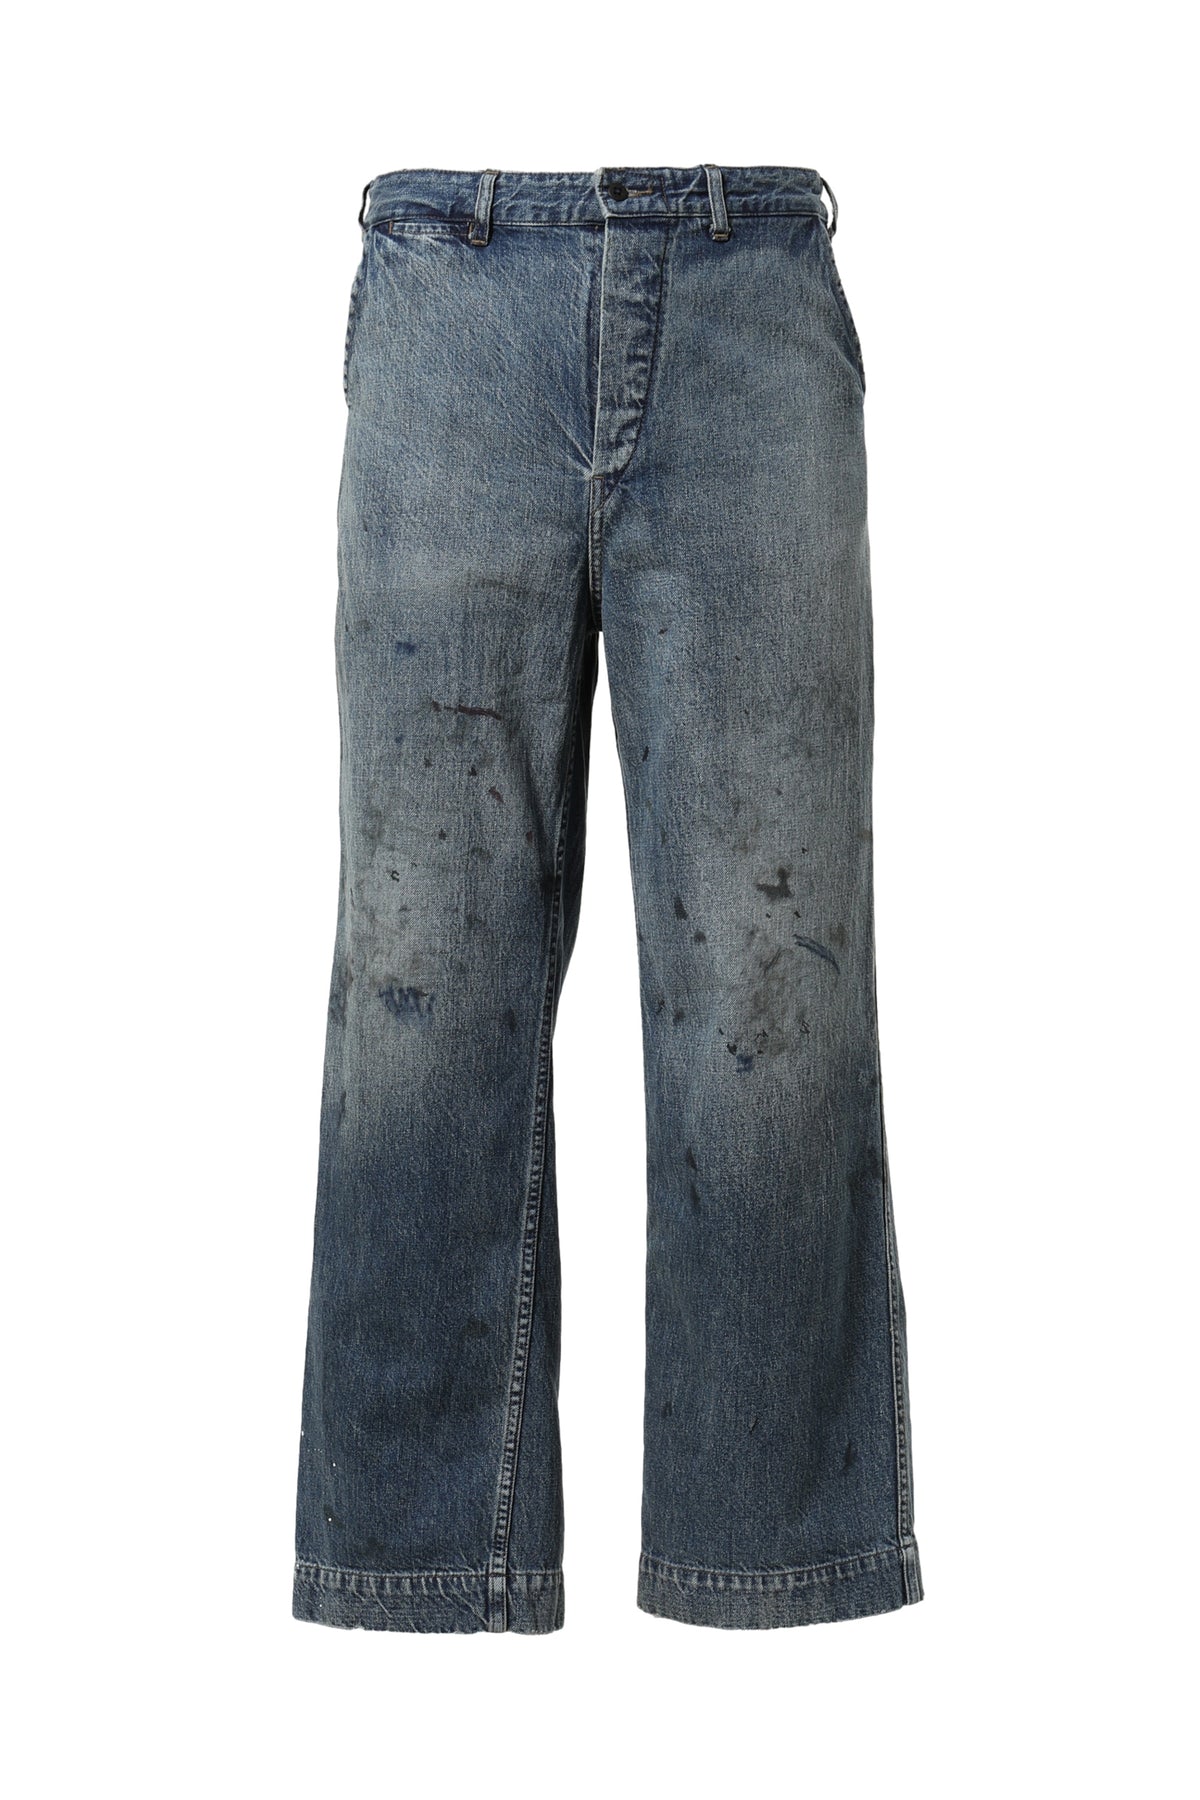 BOW WOW USN DENM TROUSERS / INDIGO AGEING PAINTED